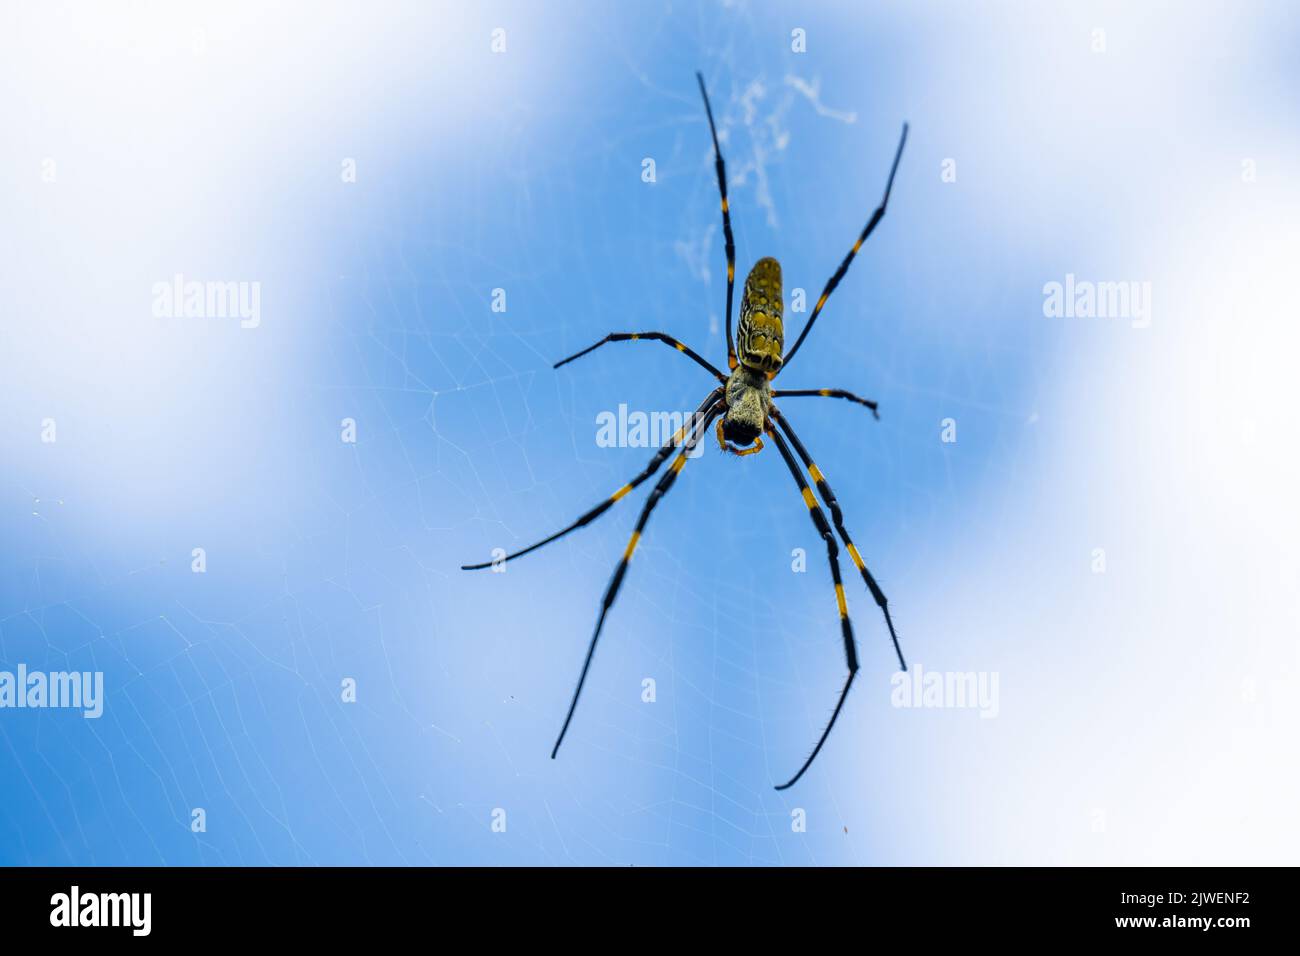 Joro spider (Trichonephila clavata), an invasive species from Asia now found in Georgia and South Carolina in the United States, on her large web. Stock Photo